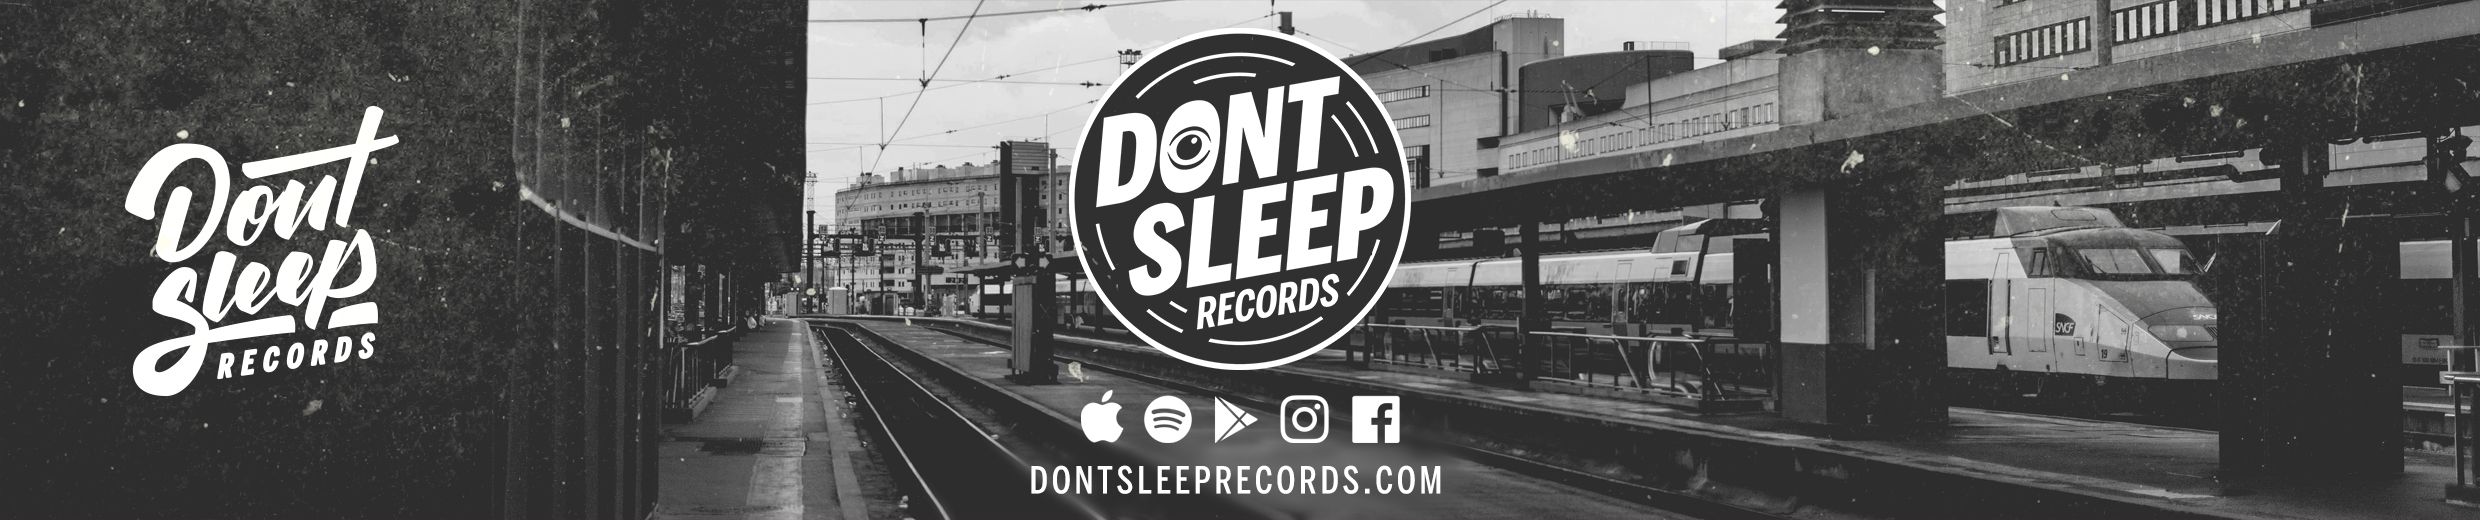 Stream Don't Sleep Records music | Listen to songs, albums, playlists for  free on SoundCloud